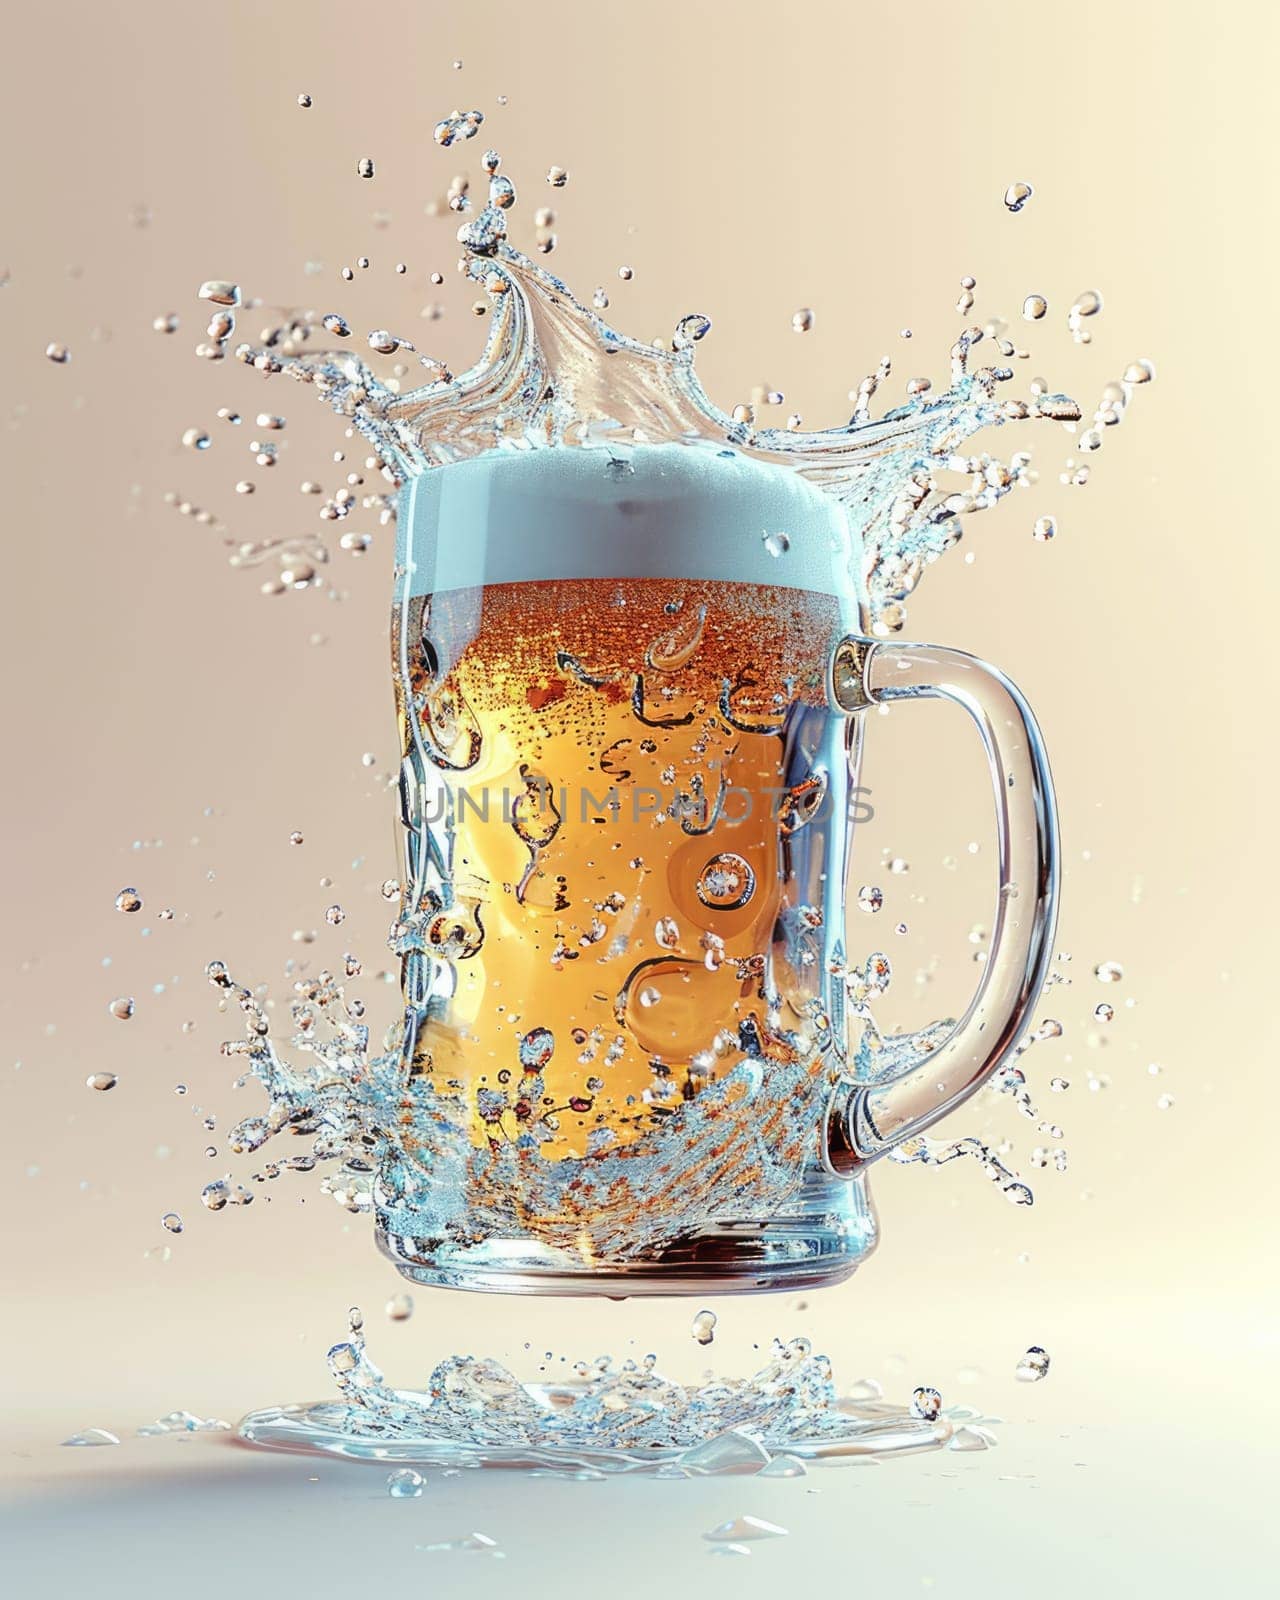 Mug of fresh beer in the air with bright splashes on light background